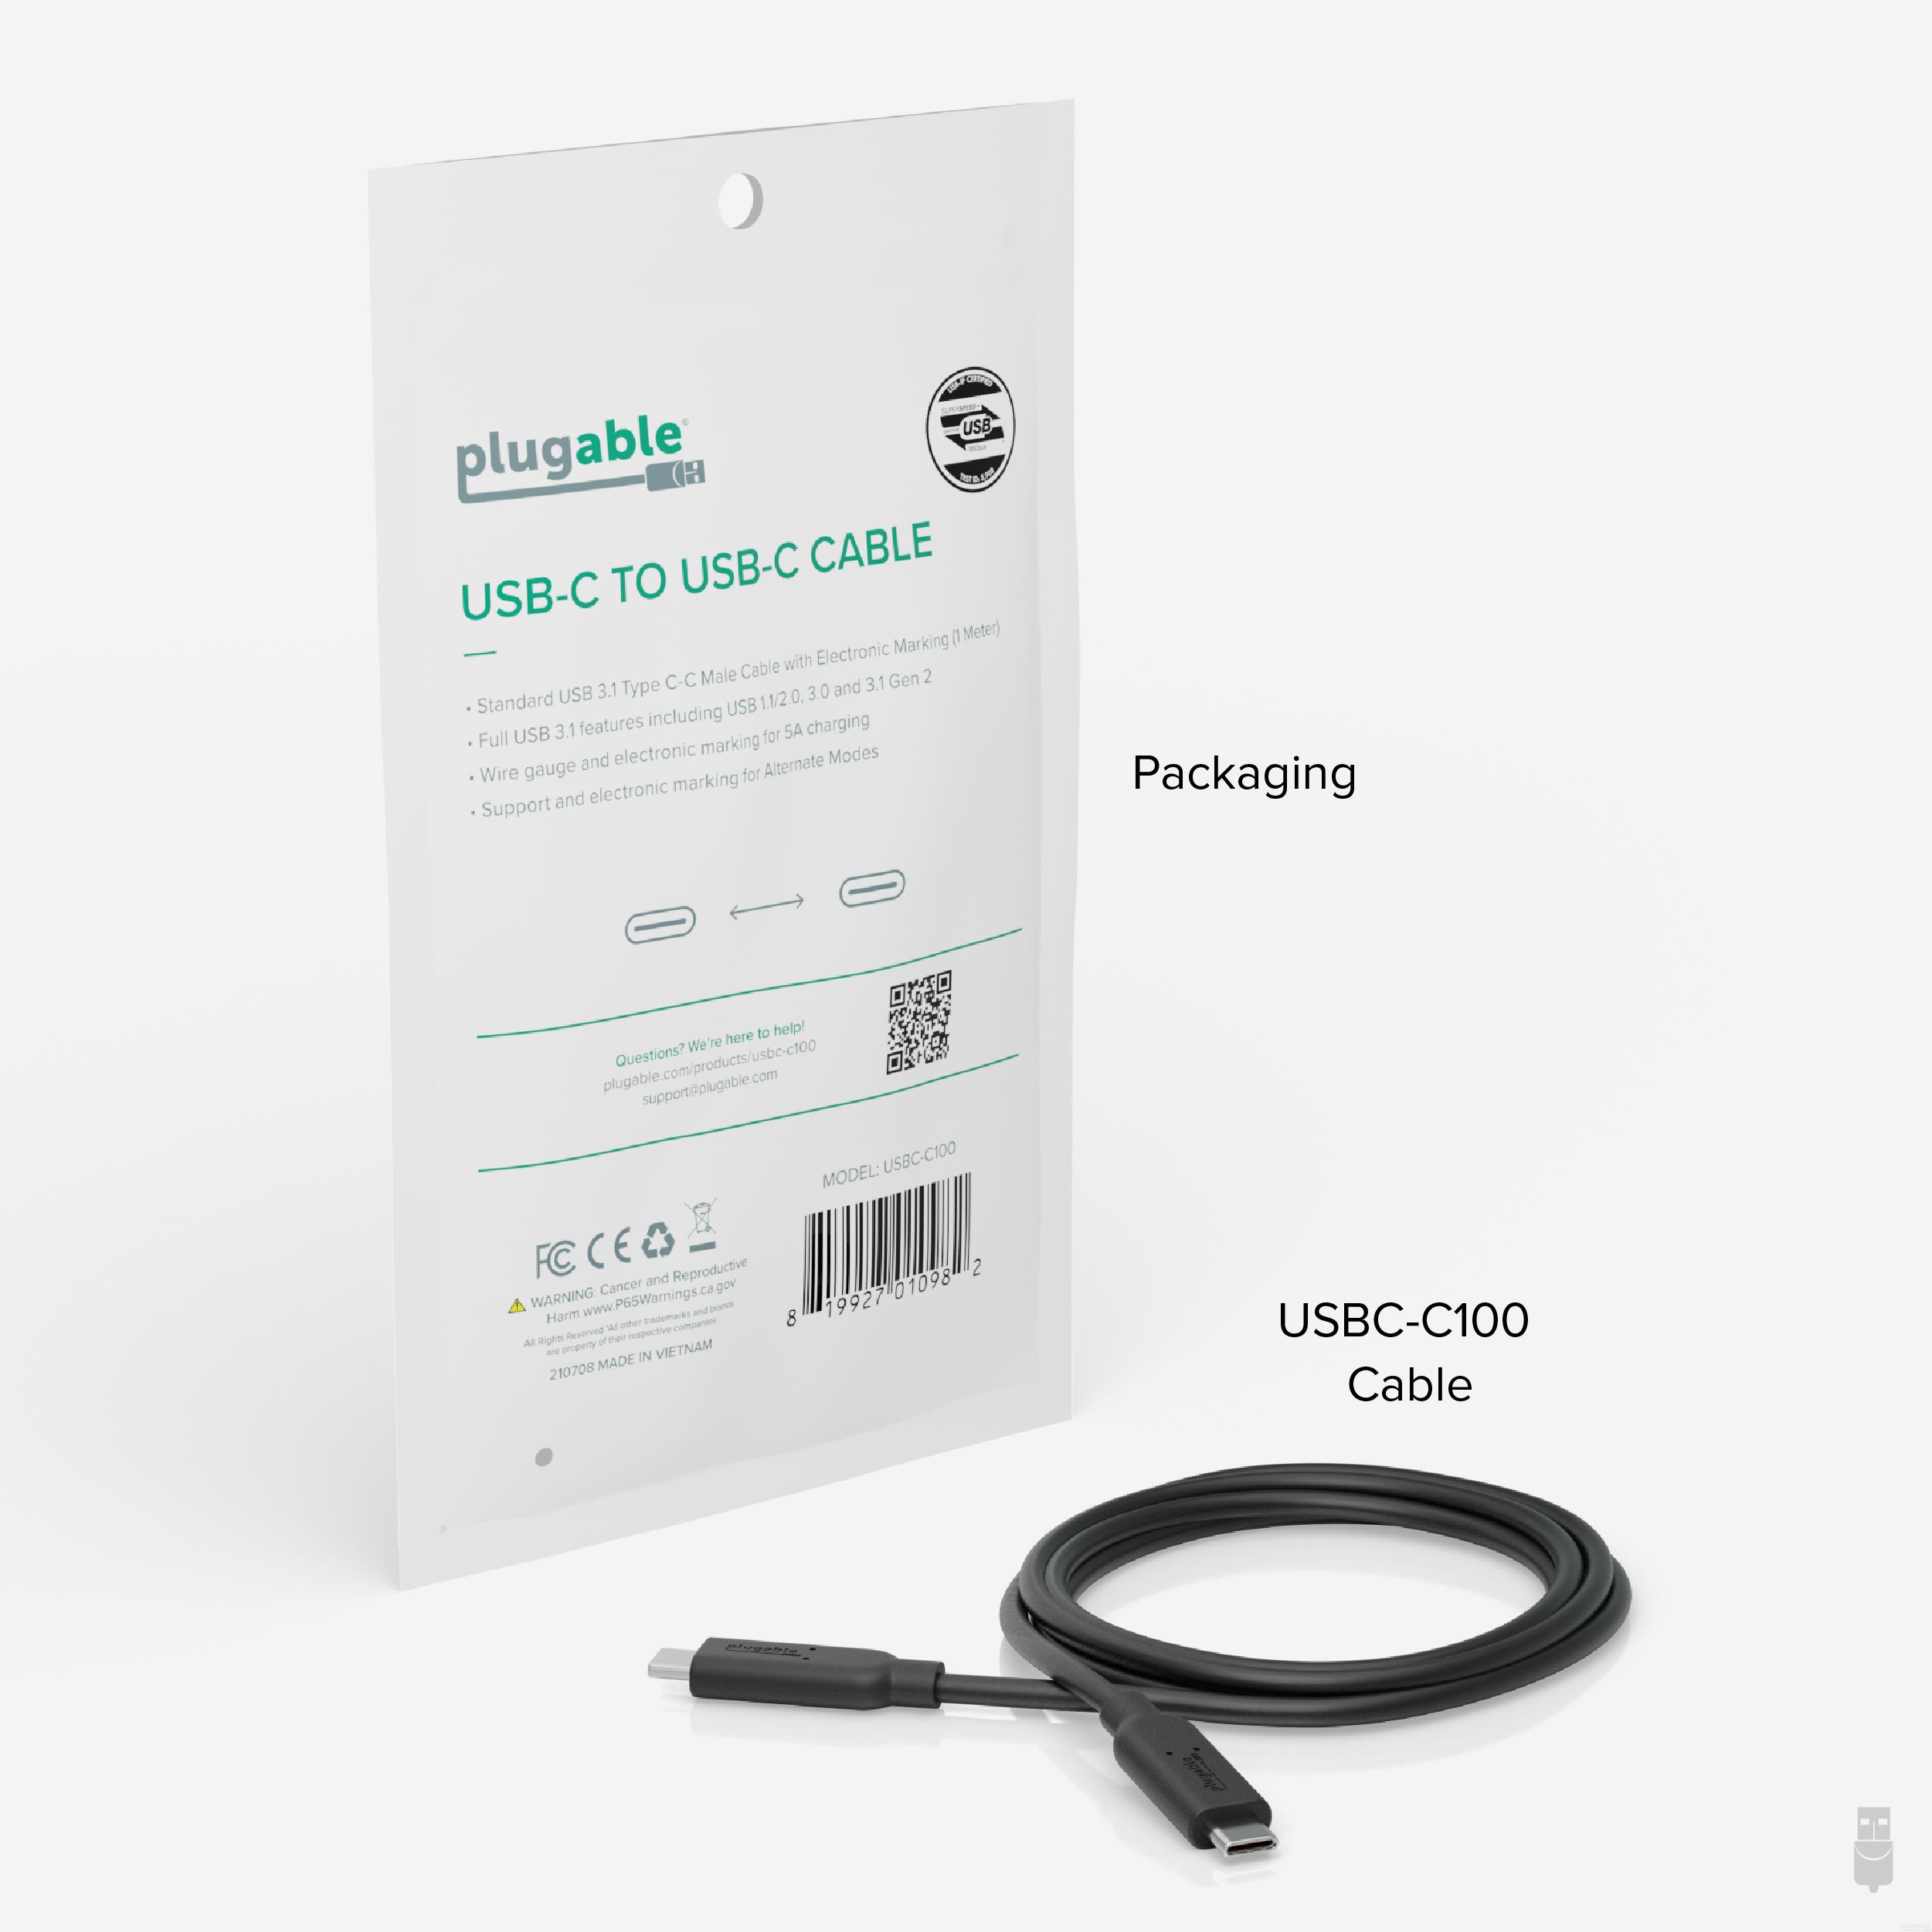 Plugable 10Gbps USB C to USB C Cable, 3.3 feet (1 Meter), 5A, USB-IF Certified, USB 3.1 Gen 2 Type-C - image 4 of 5